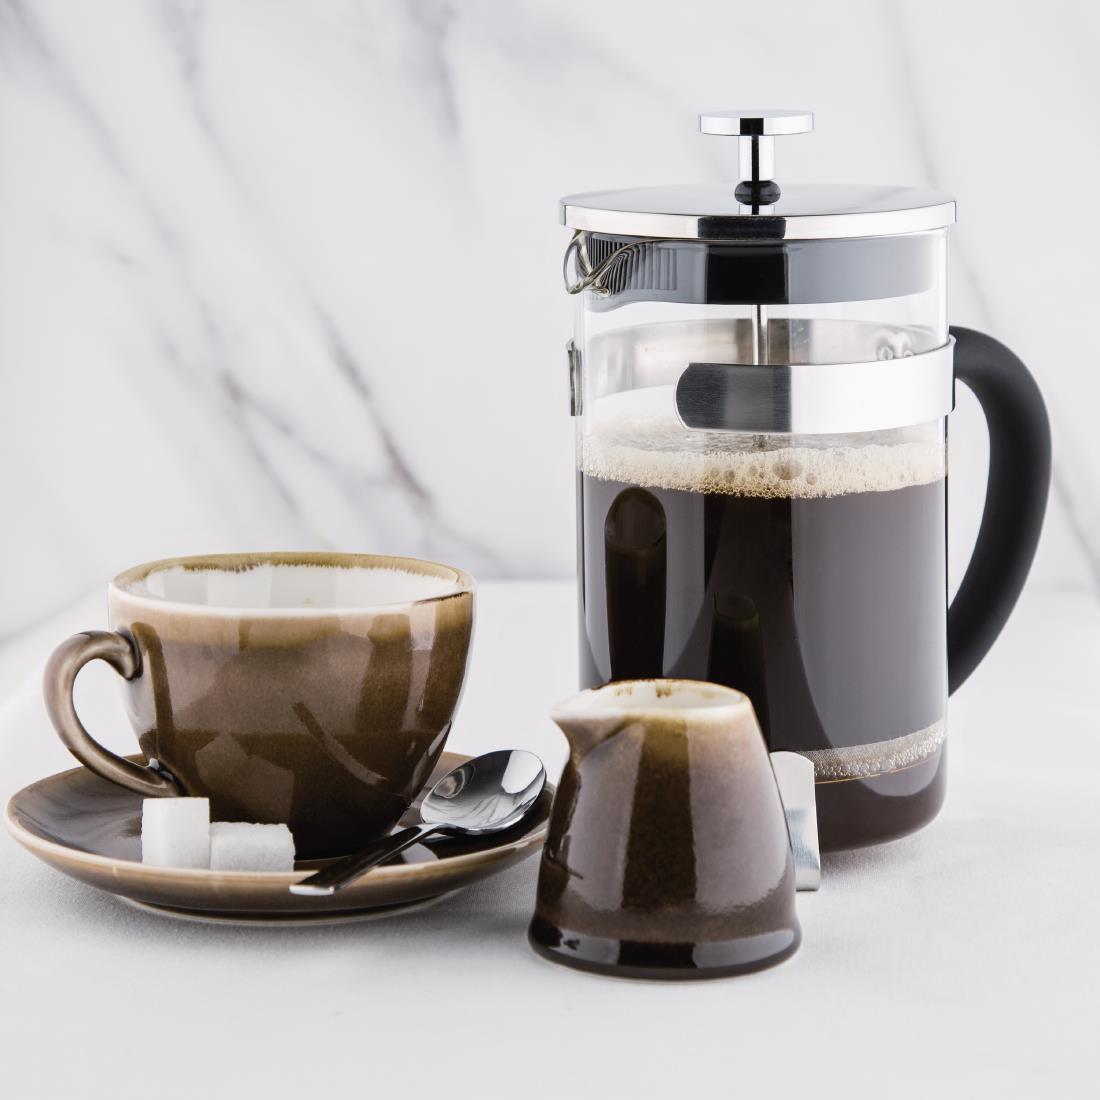 Olympia Contemporary Glass Cafetiere 6 Cup - GF231  - 4